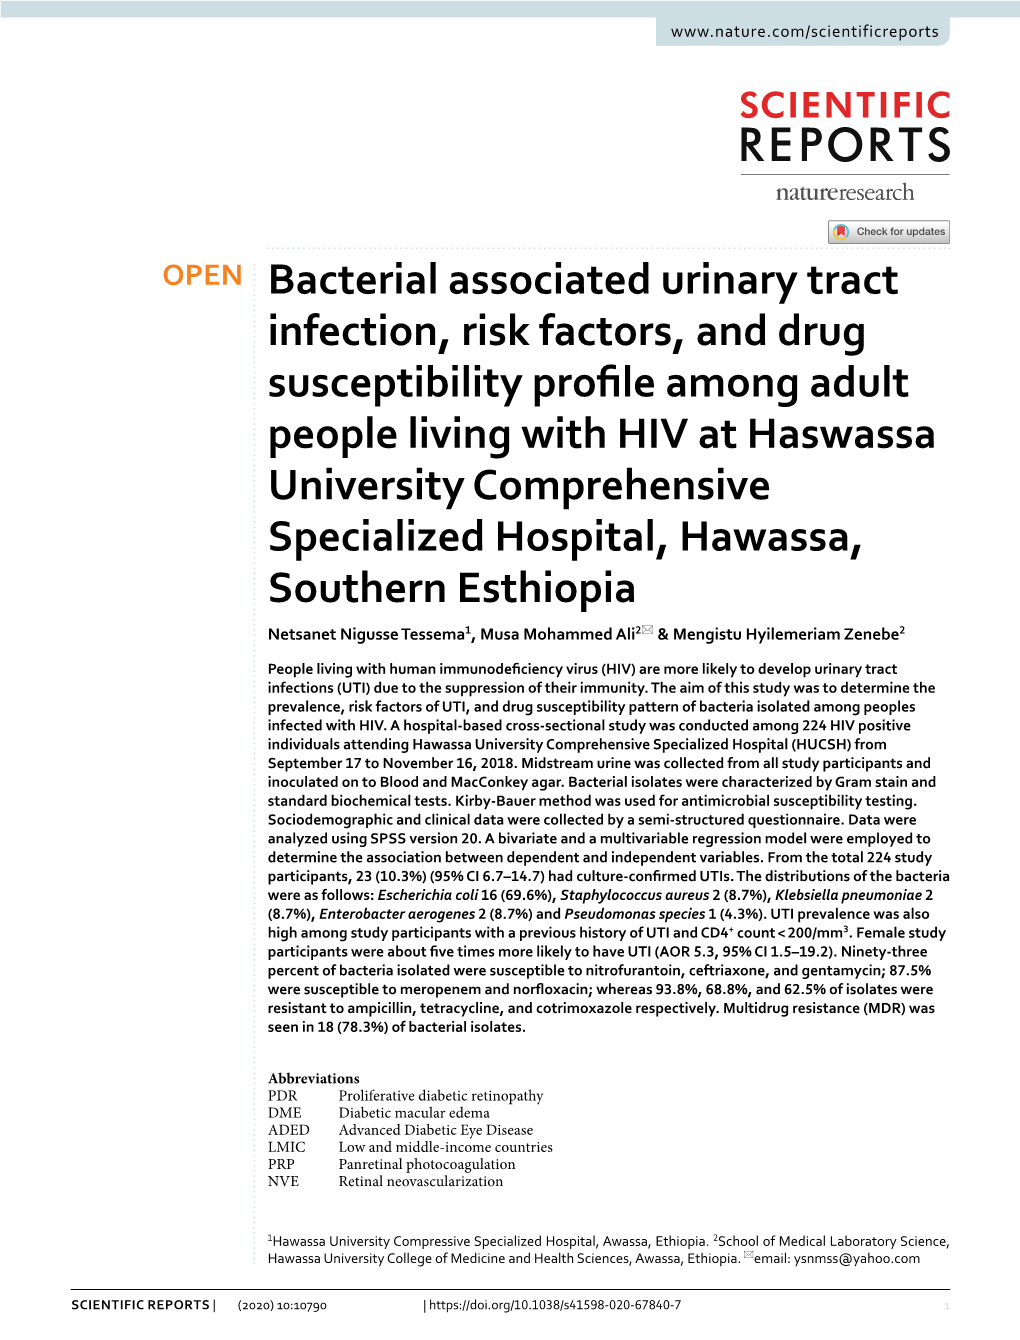 Bacterial Associated Urinary Tract Infection, Risk Factors, and Drug